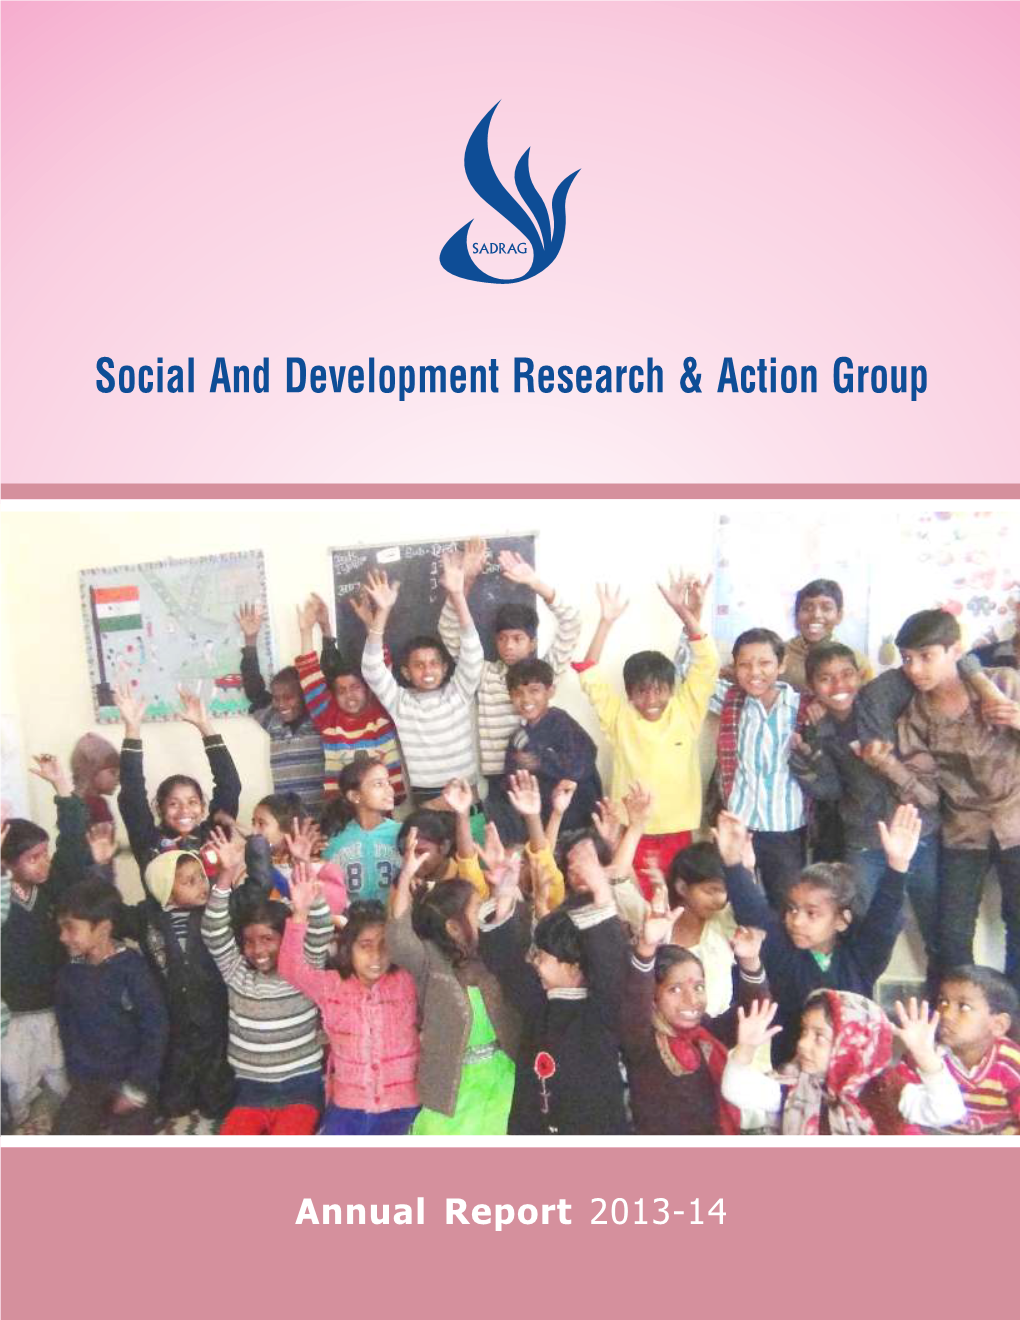 Social and Development Research & Action Group